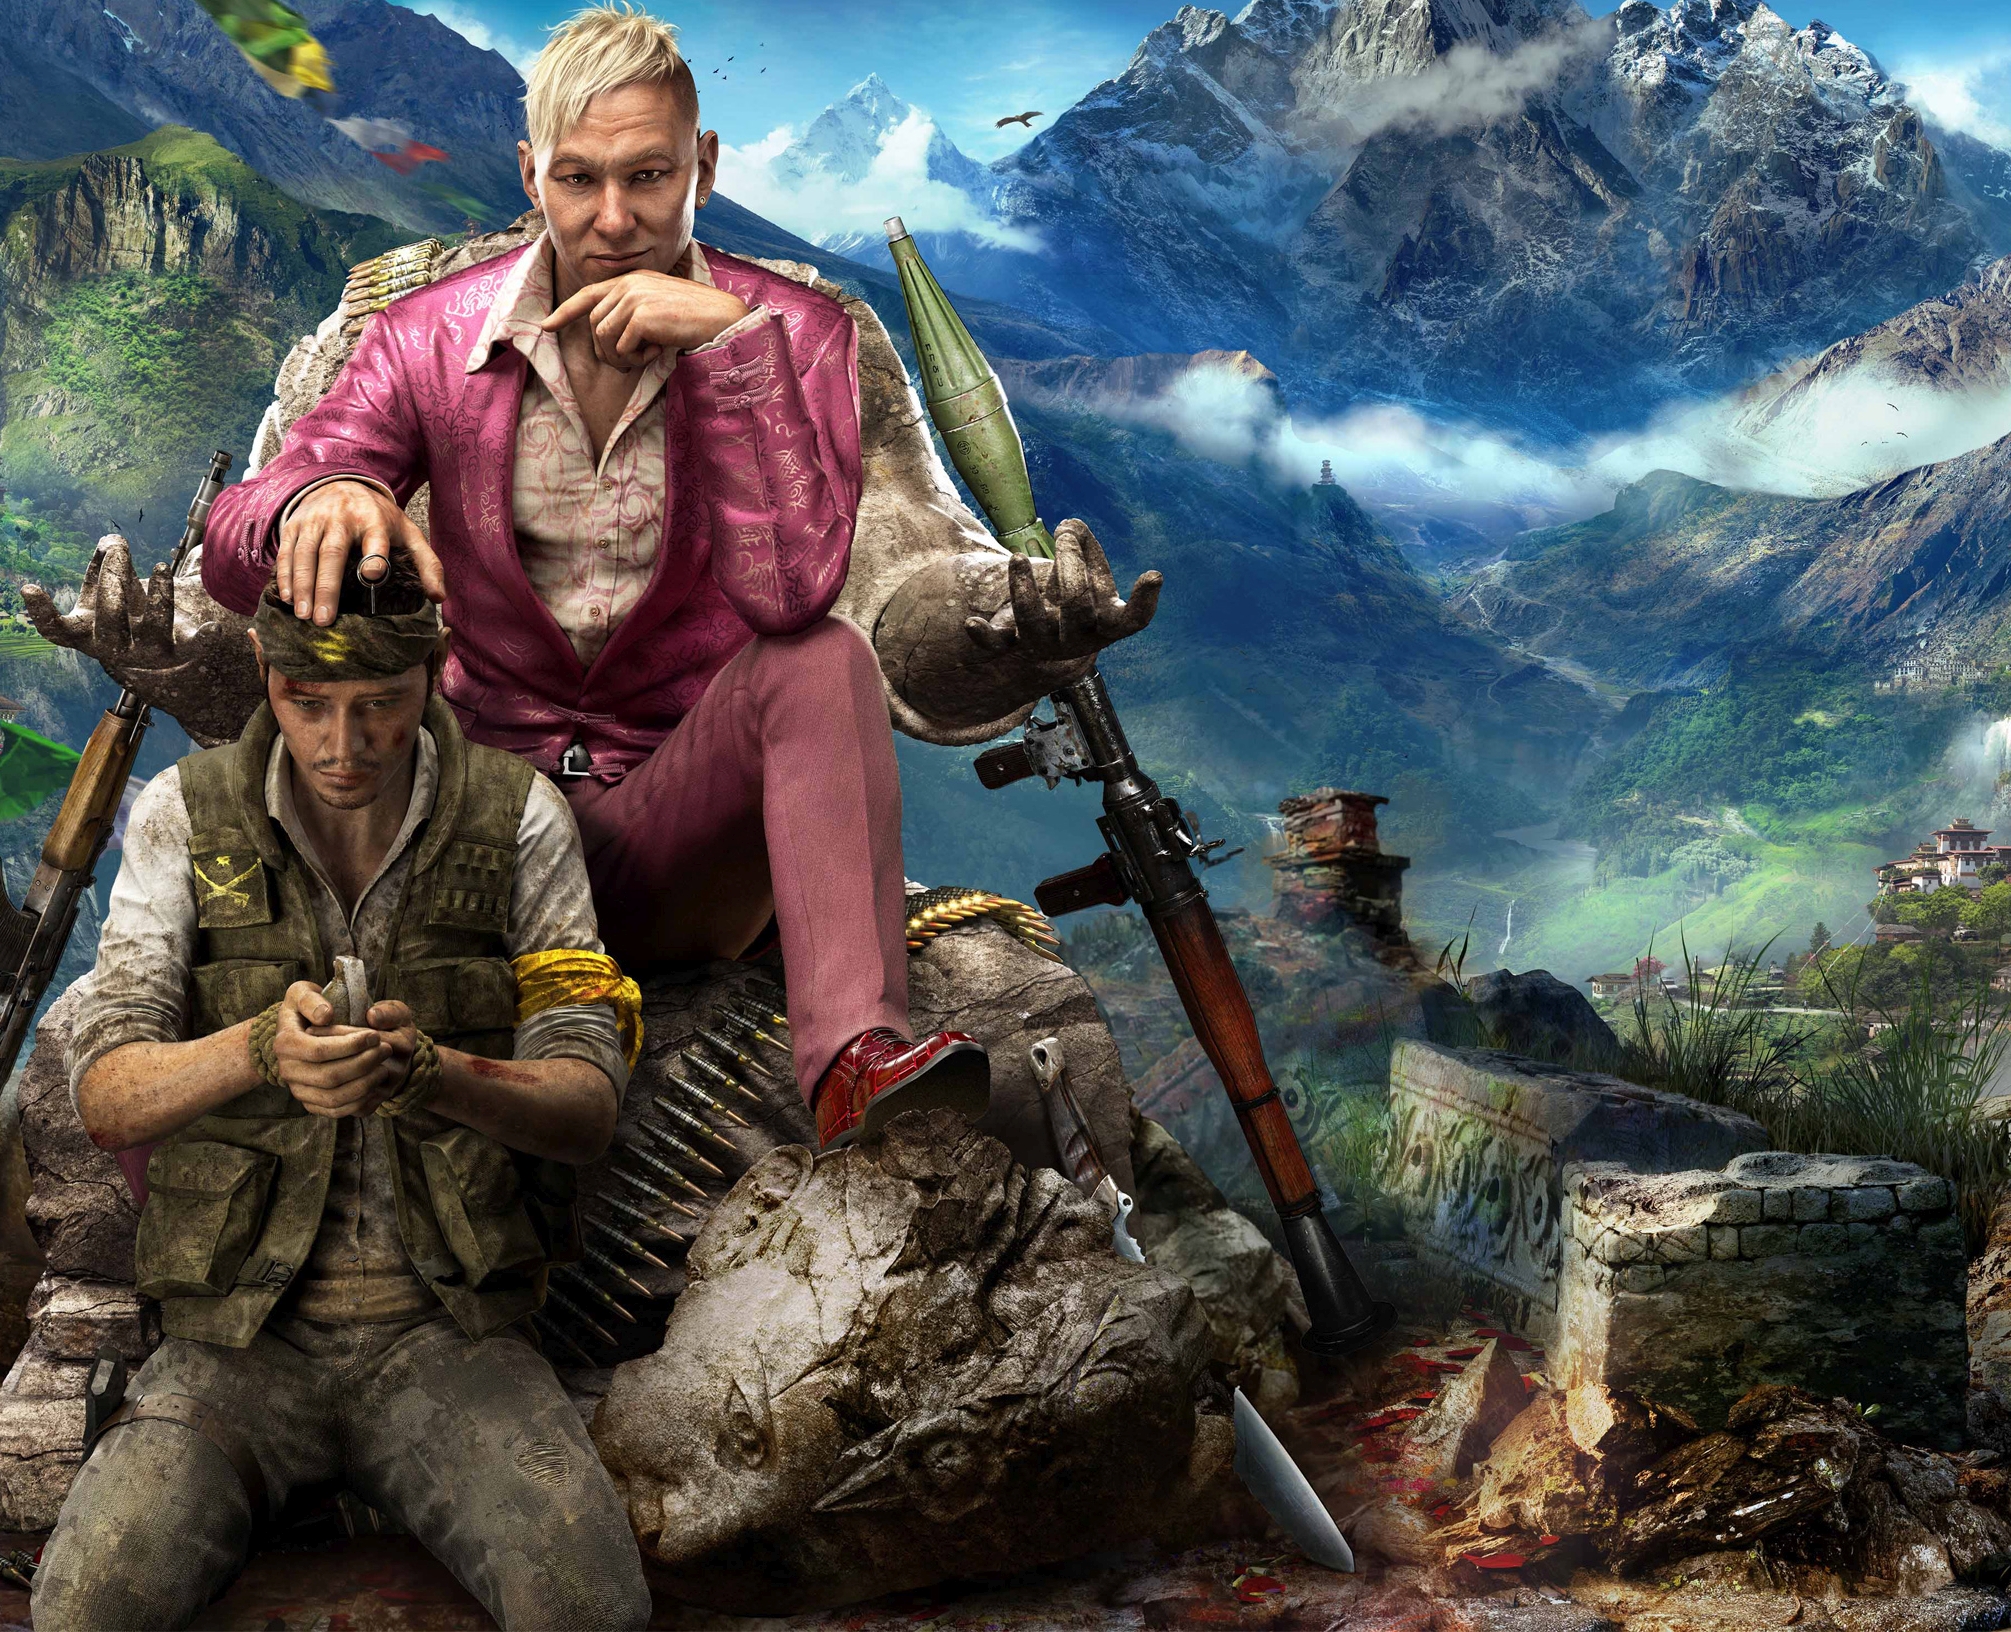 Far Cry 4 - Escape From Durgesh Prison DLC with Expansion Pack Only Price  in India - Buy Far Cry 4 - Escape From Durgesh Prison DLC with Expansion  Pack Only online at